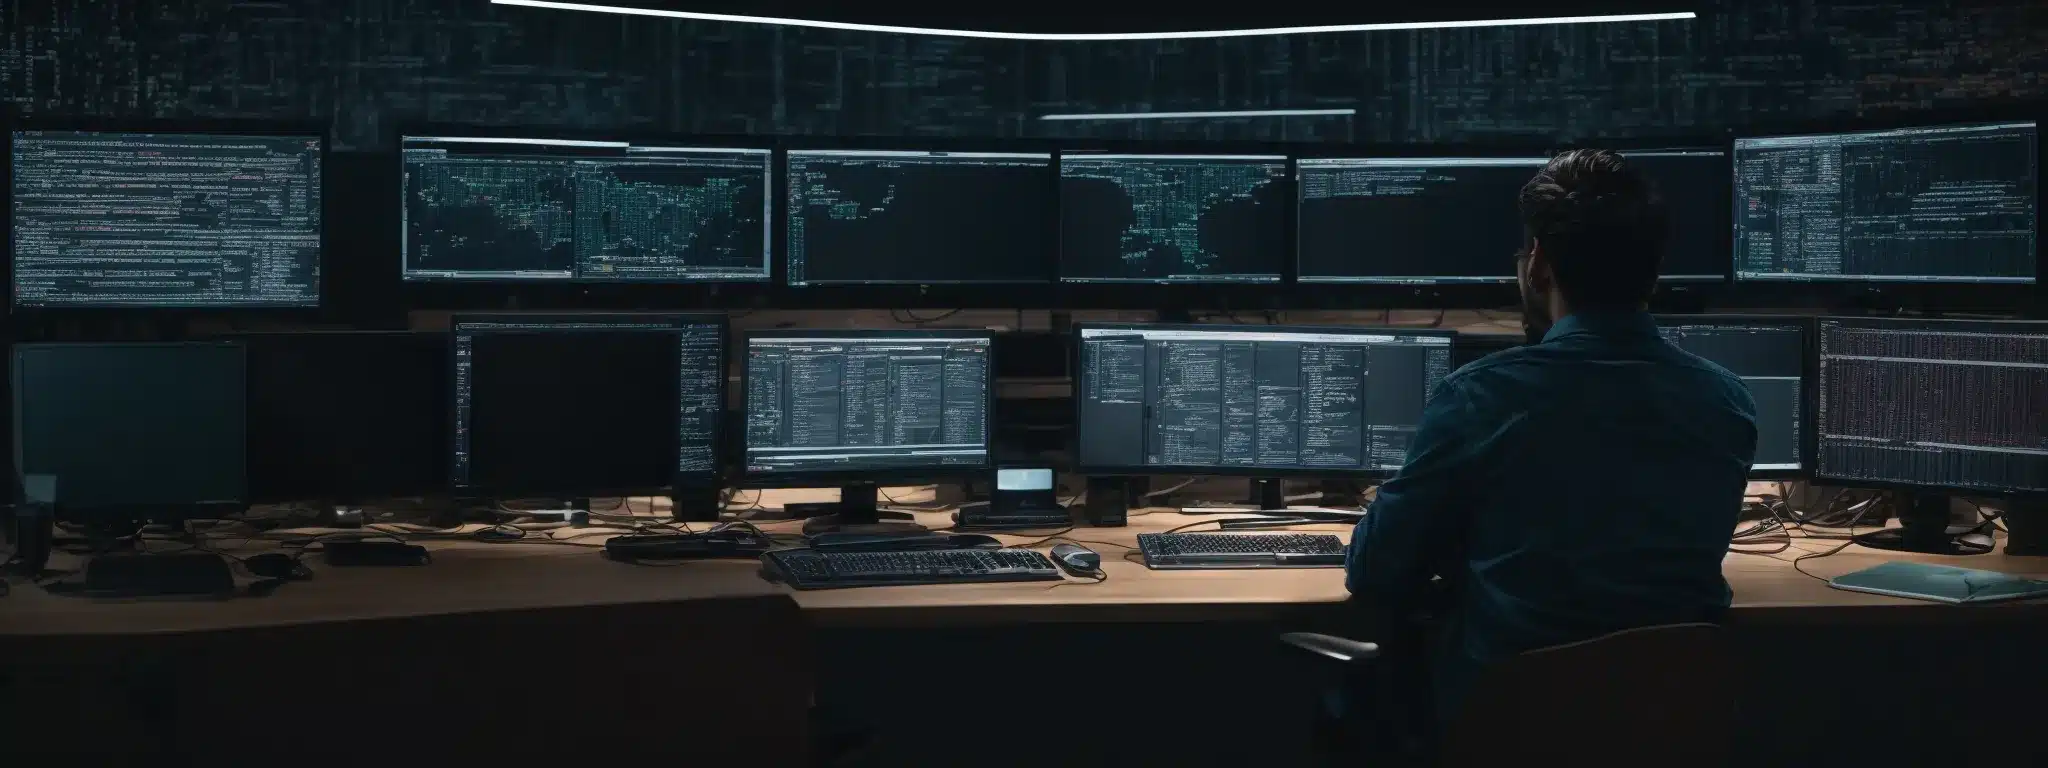 A Person Sitting At A Computer Desk, Surrounded By Multiple Monitors Displaying Lines Of Code And Web Design Layouts.